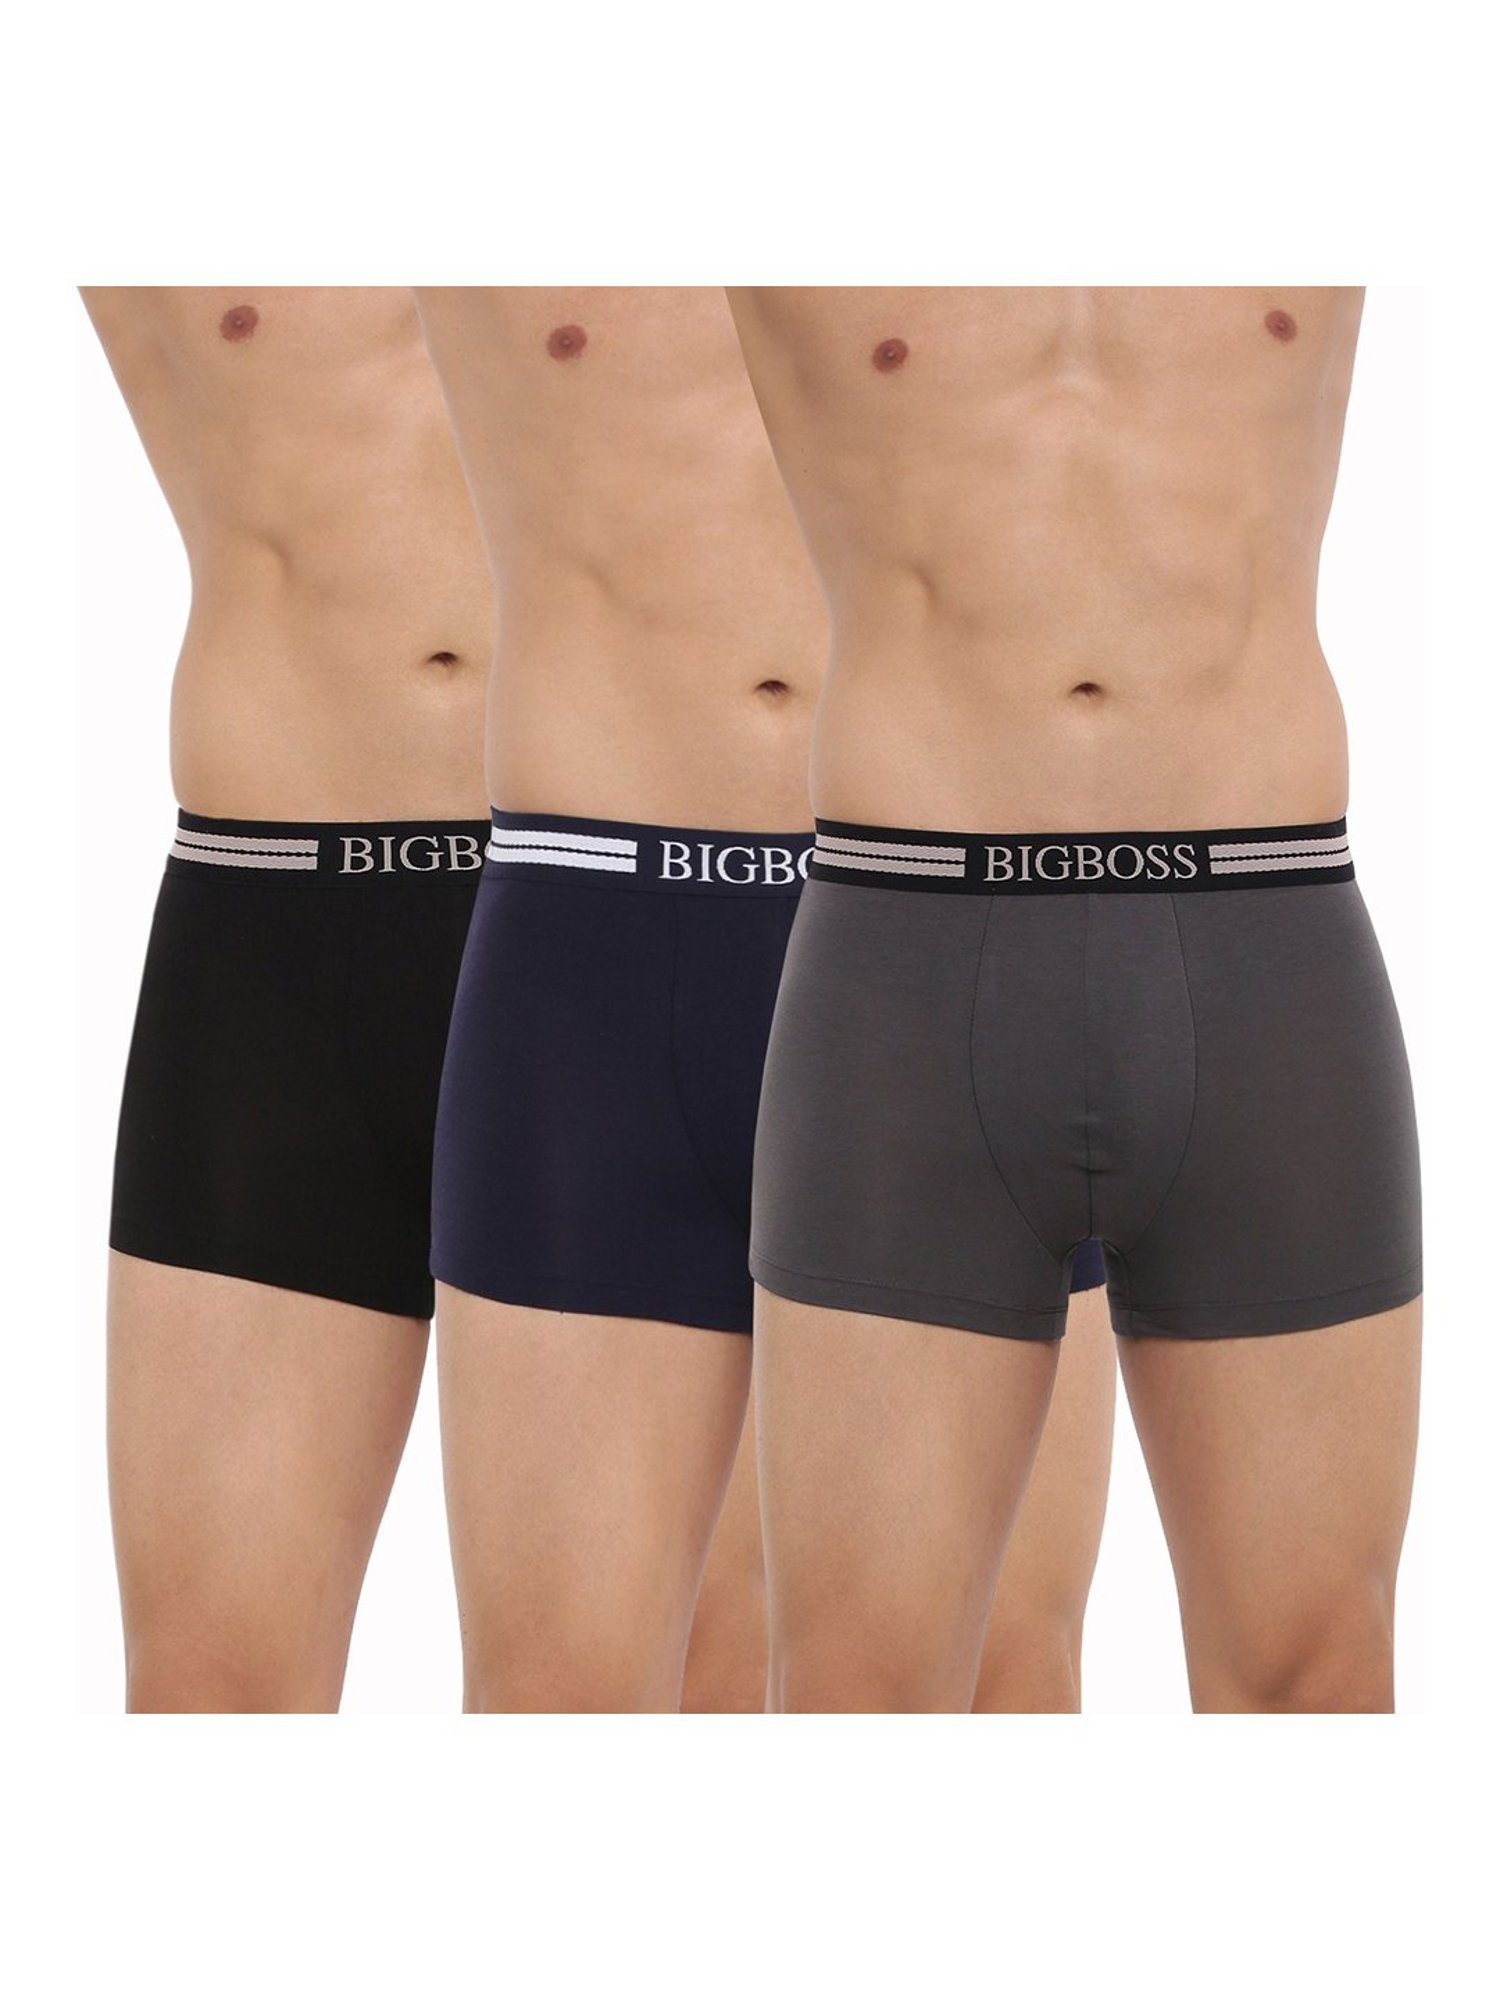 Buy Dollar Bigboss Solid Trunks - Assorted ,Pack Of 3 Online at Low Prices  in India 